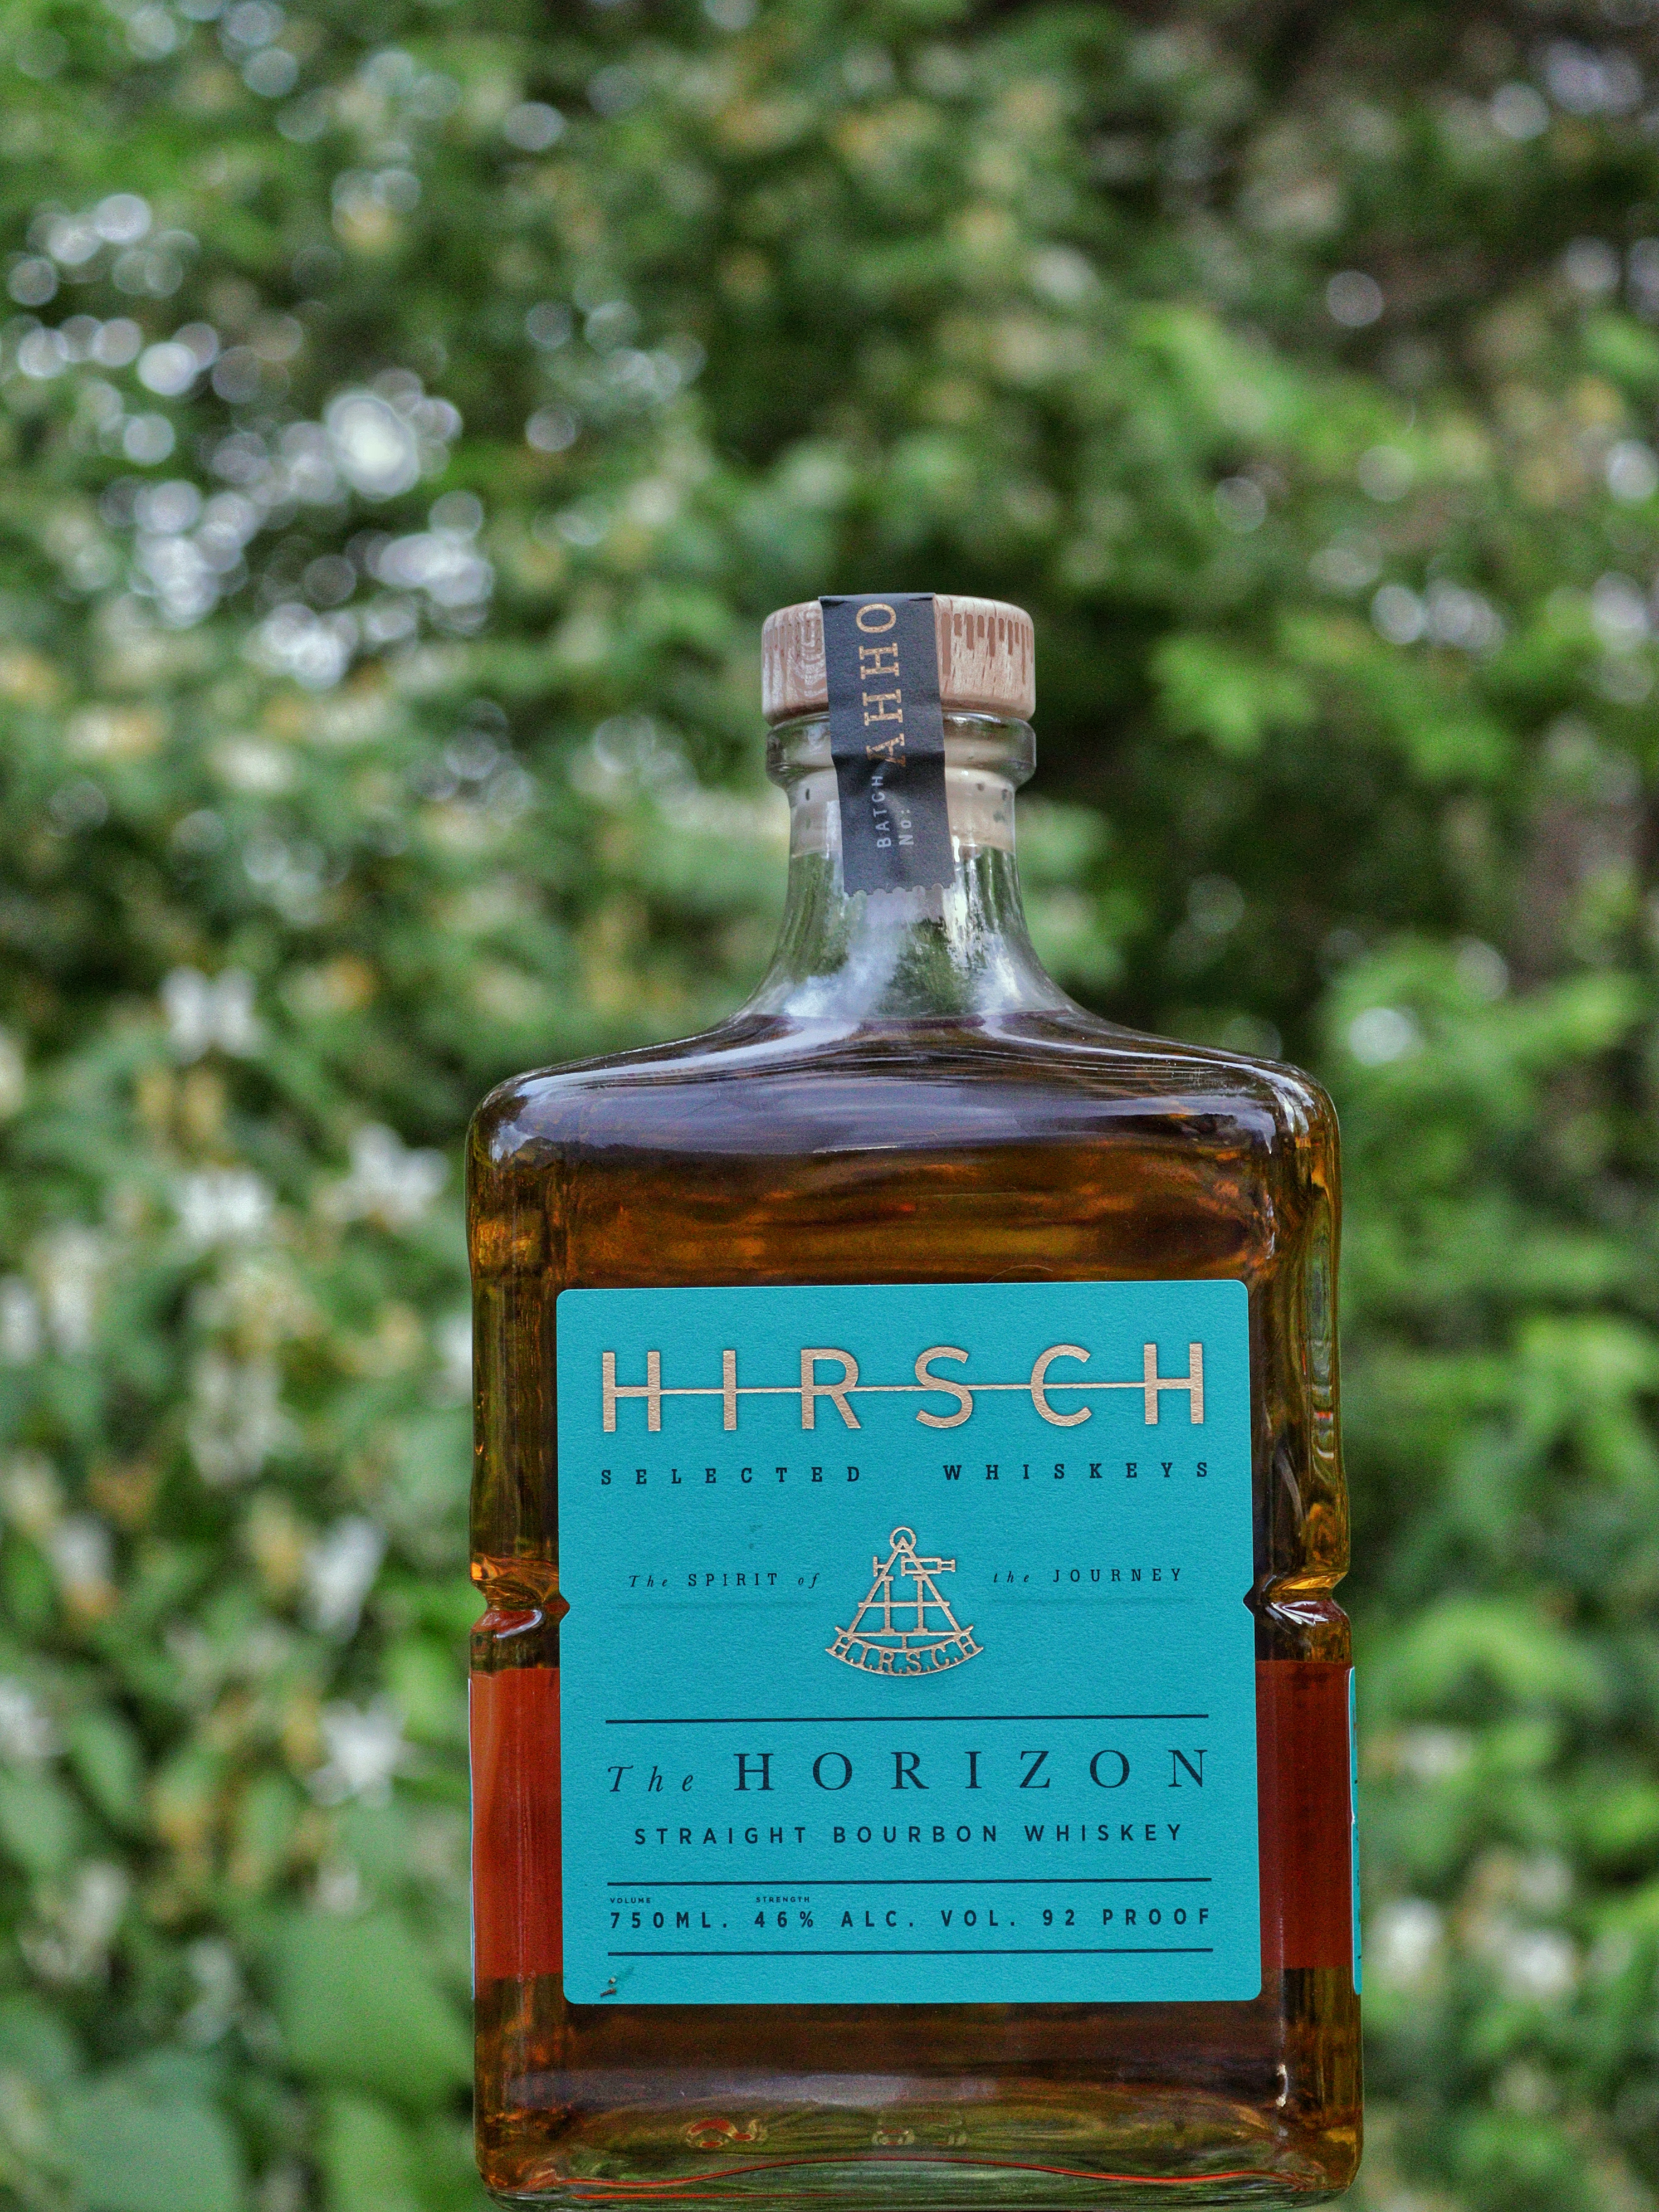 The Horizon by Hirsch sitting on a fence in spring.